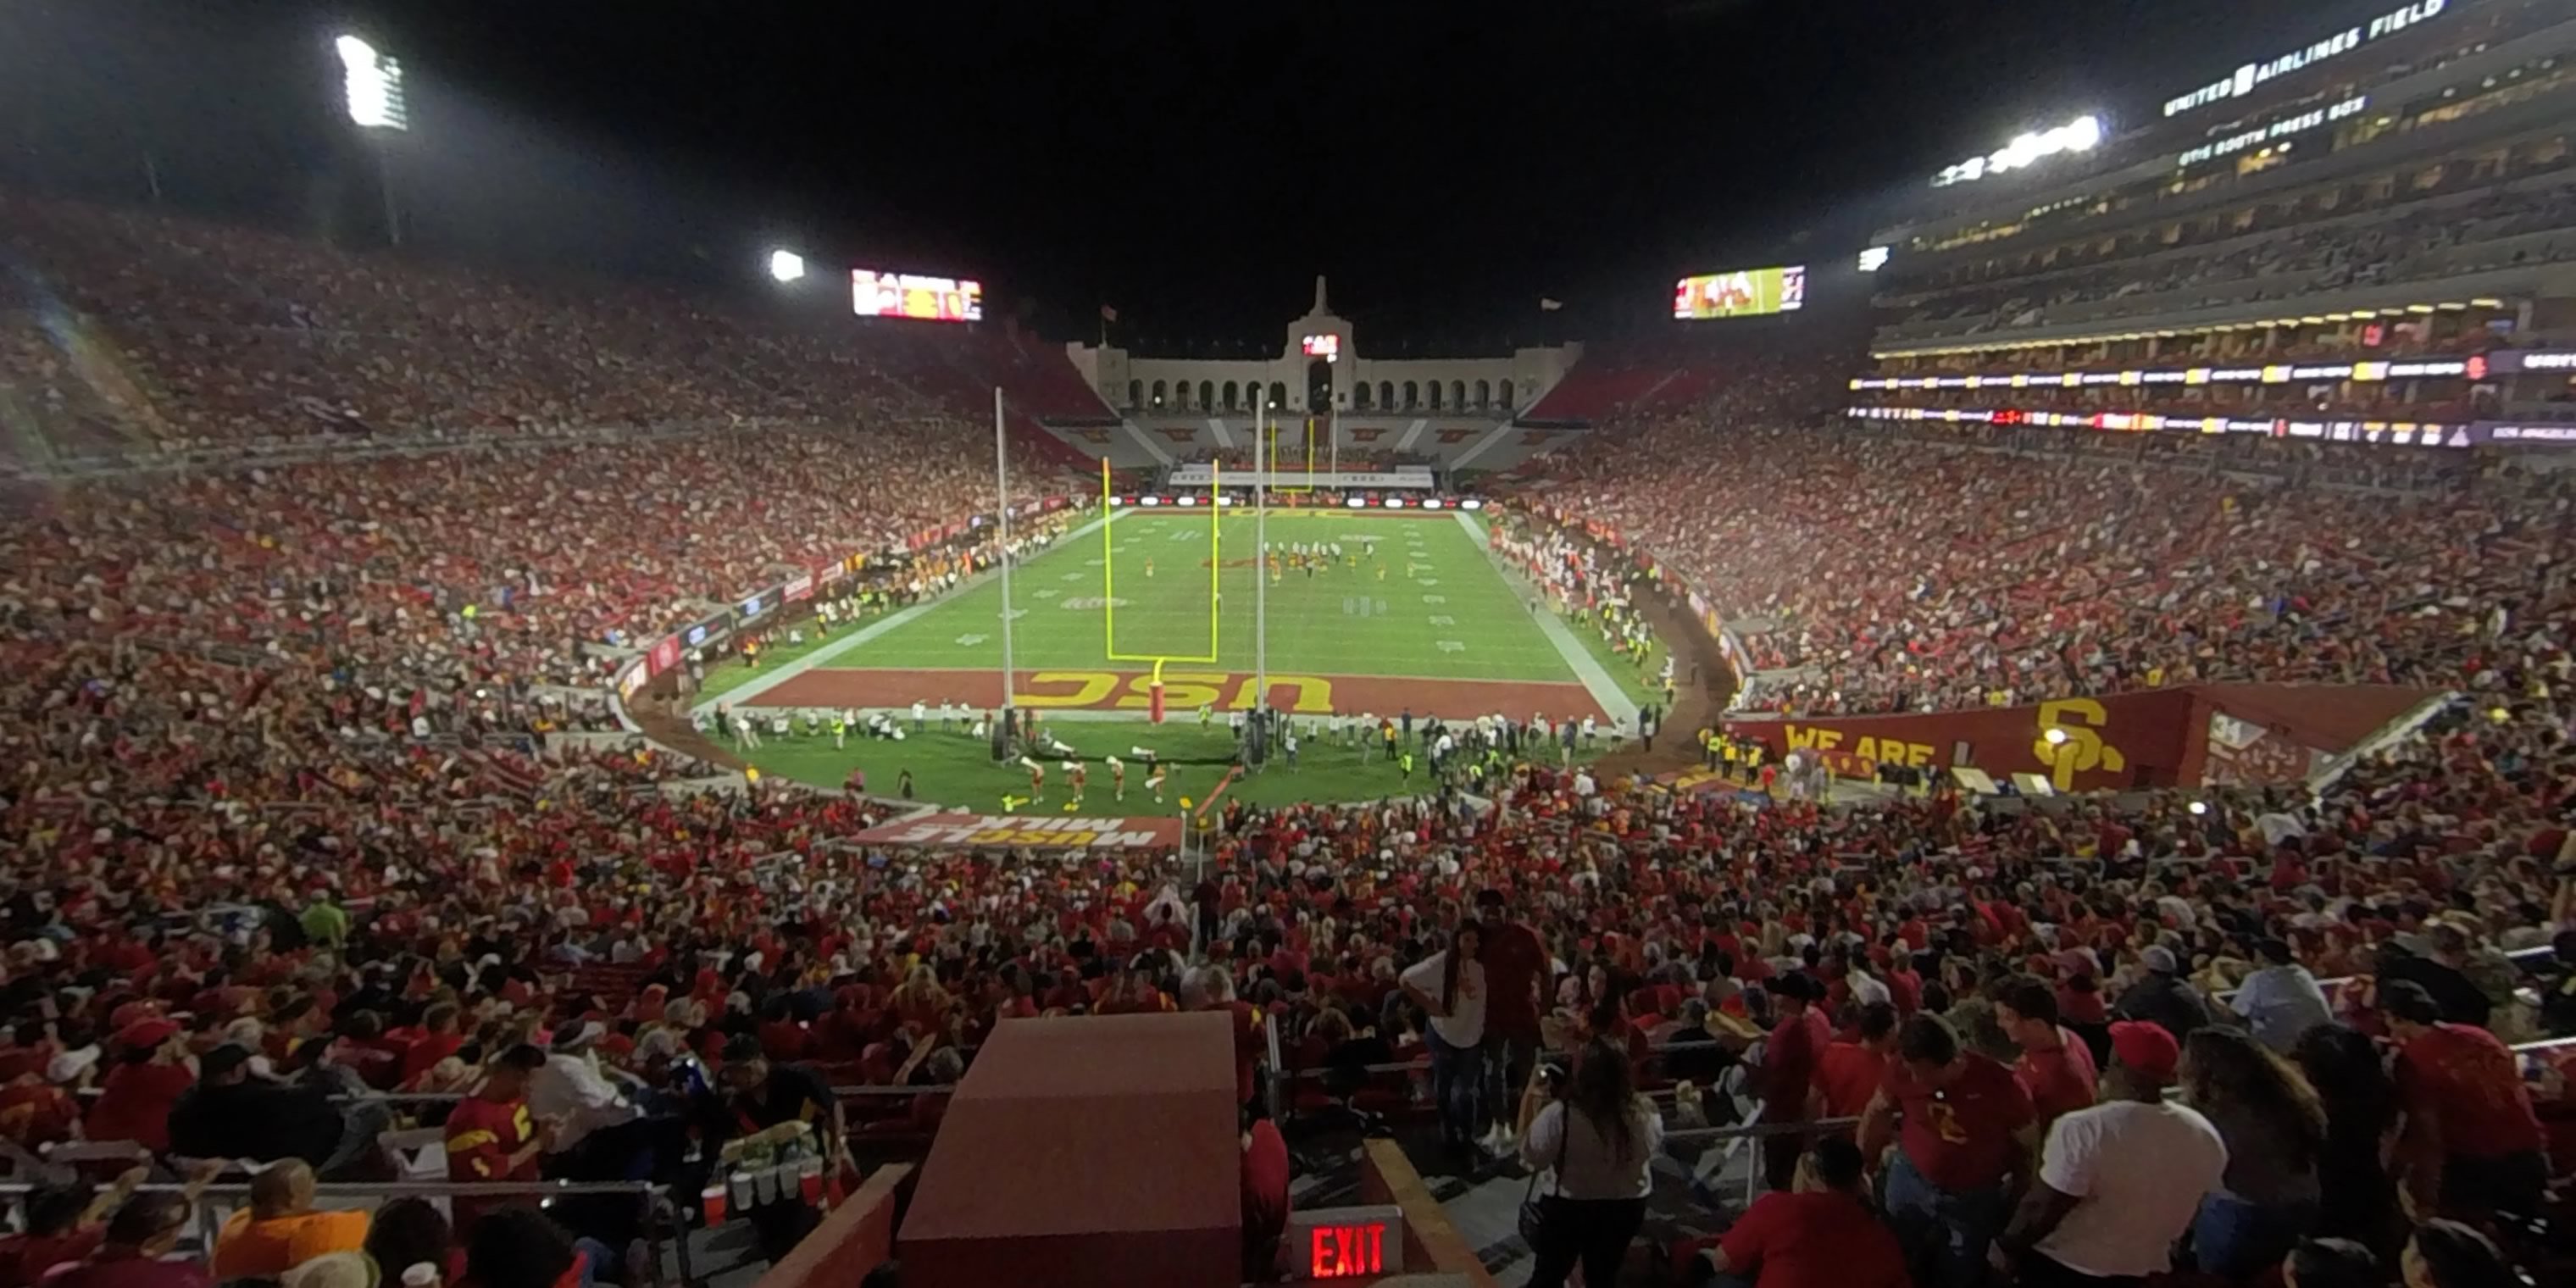 section 213 panoramic seat view  - los angeles memorial coliseum